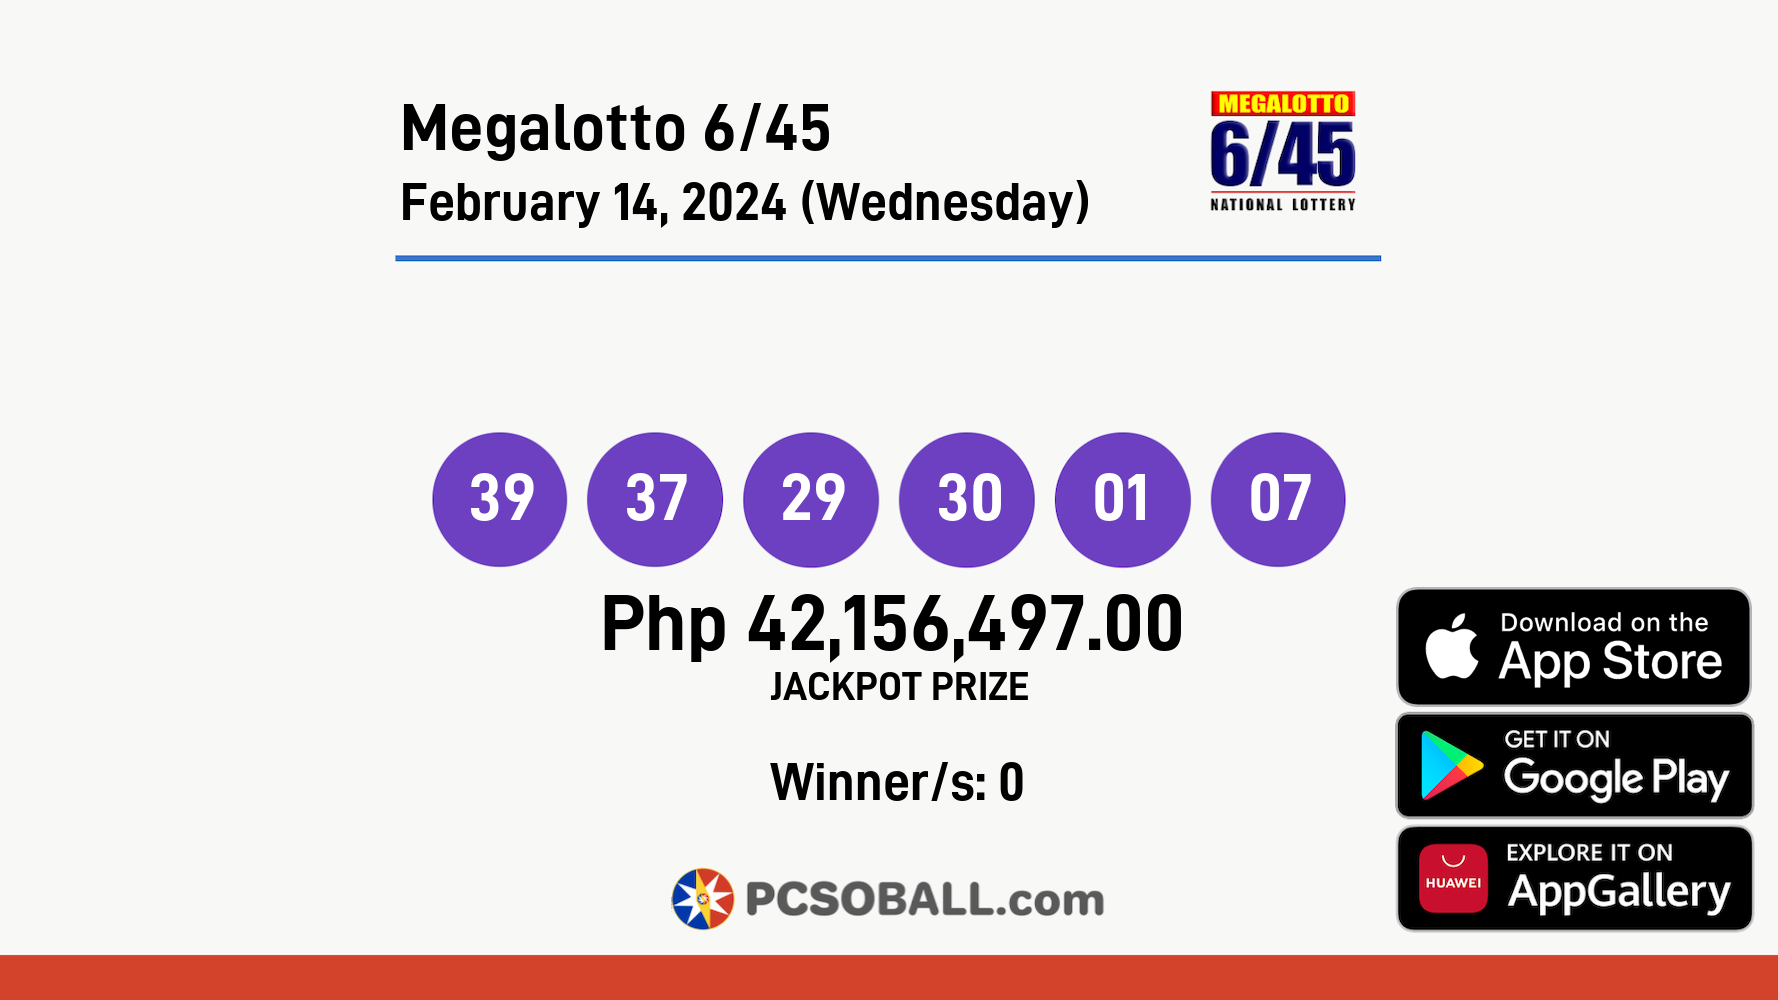 Megalotto 6/45 February 14, 2024 (Wednesday) Result